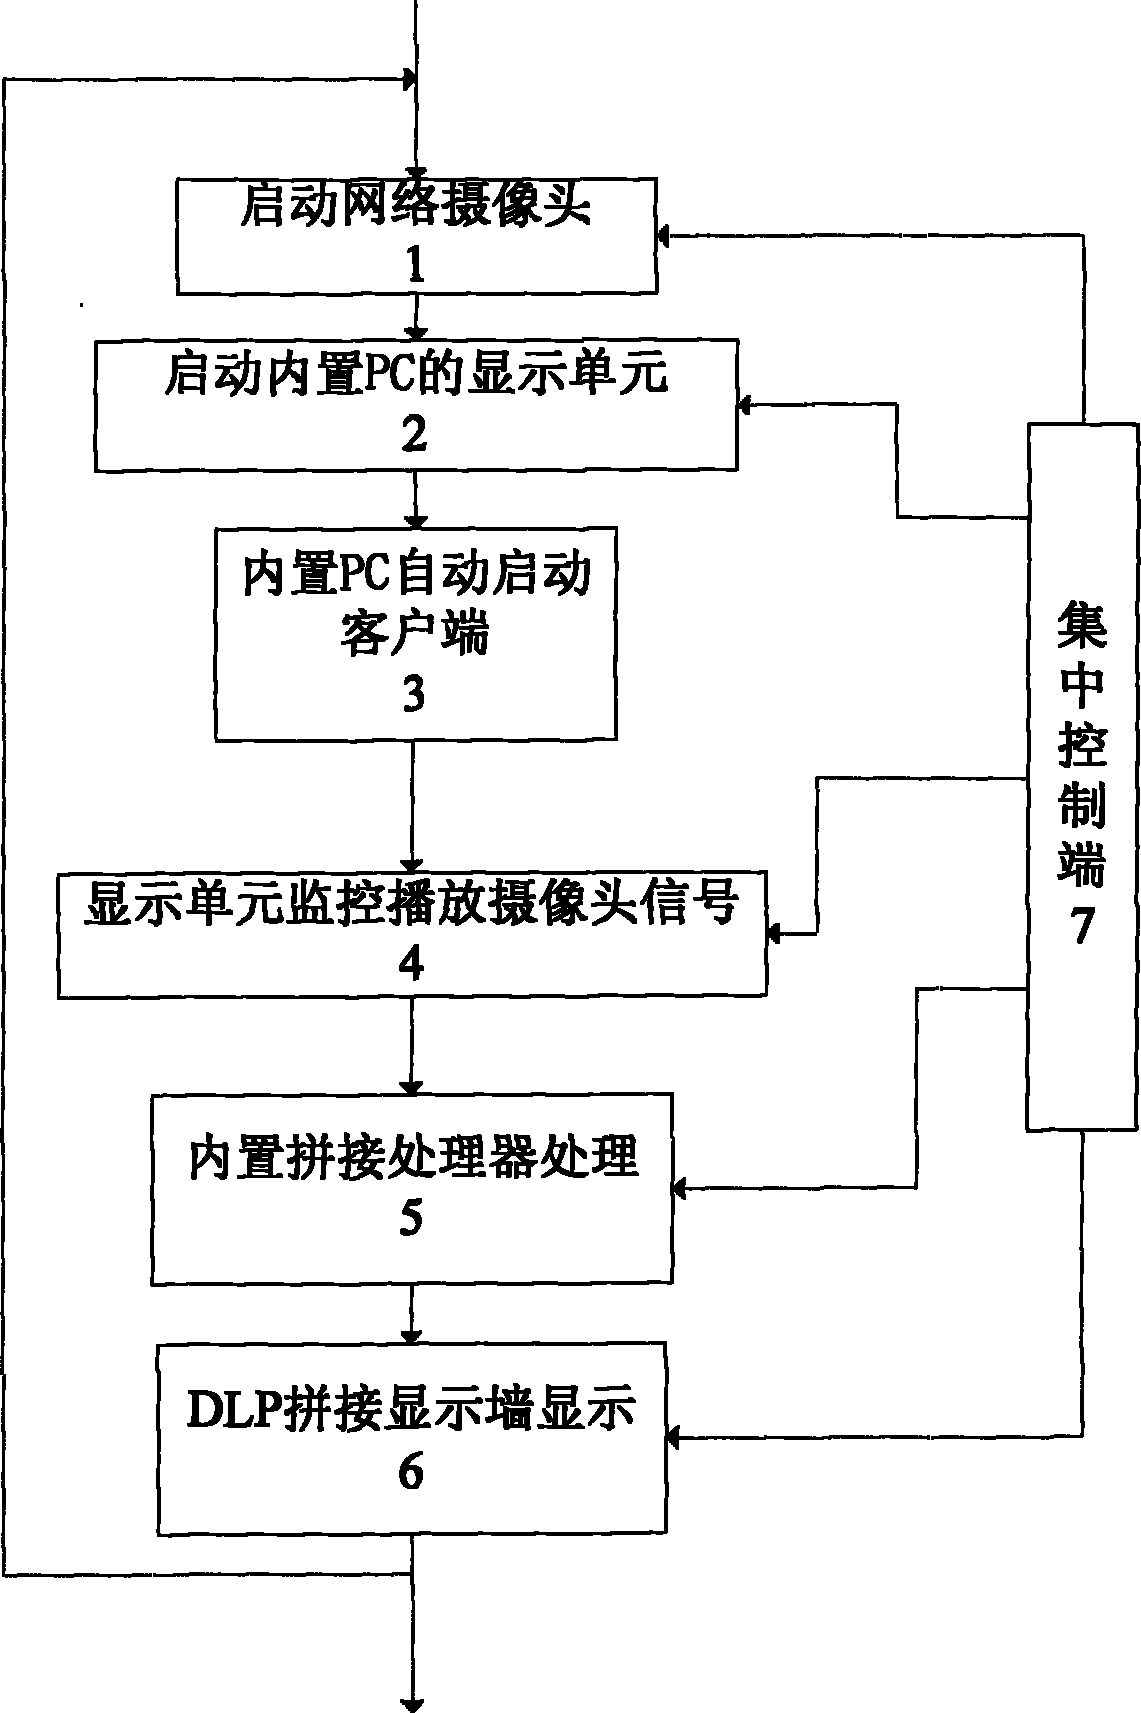 Processing method applicable to network video monitoring of digital light processing (DLP) multi-screen splicing display wall